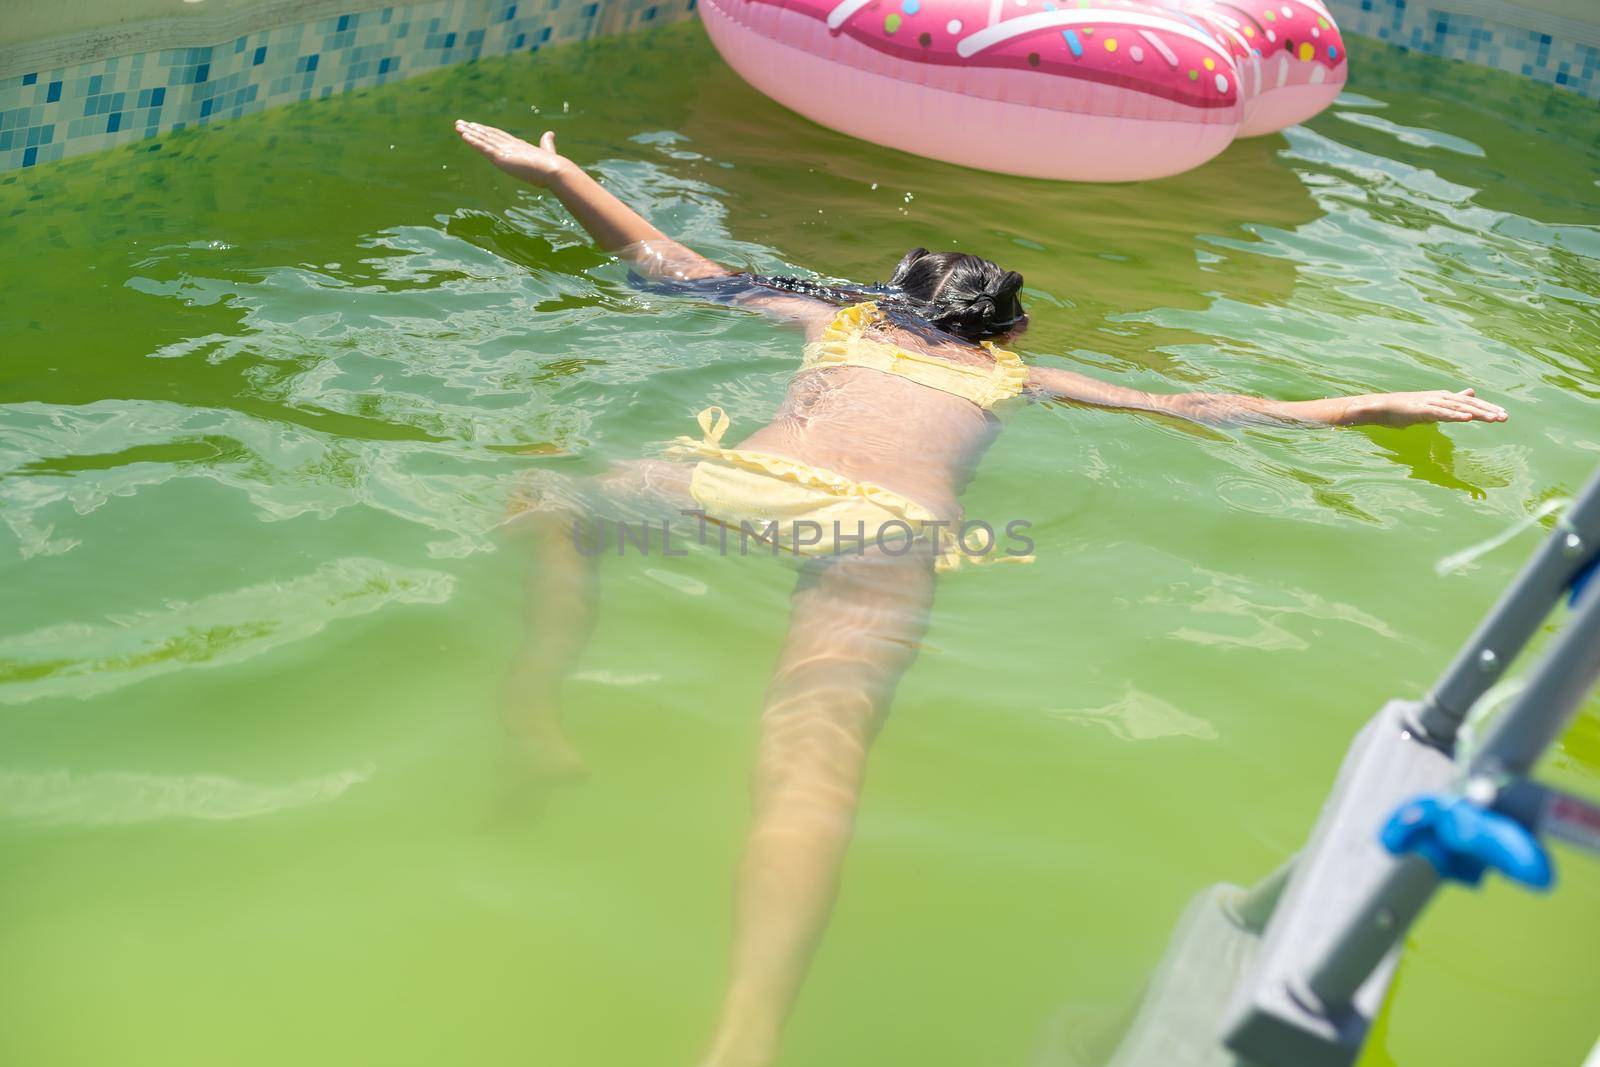 little girl in the green water of very dirty pool.